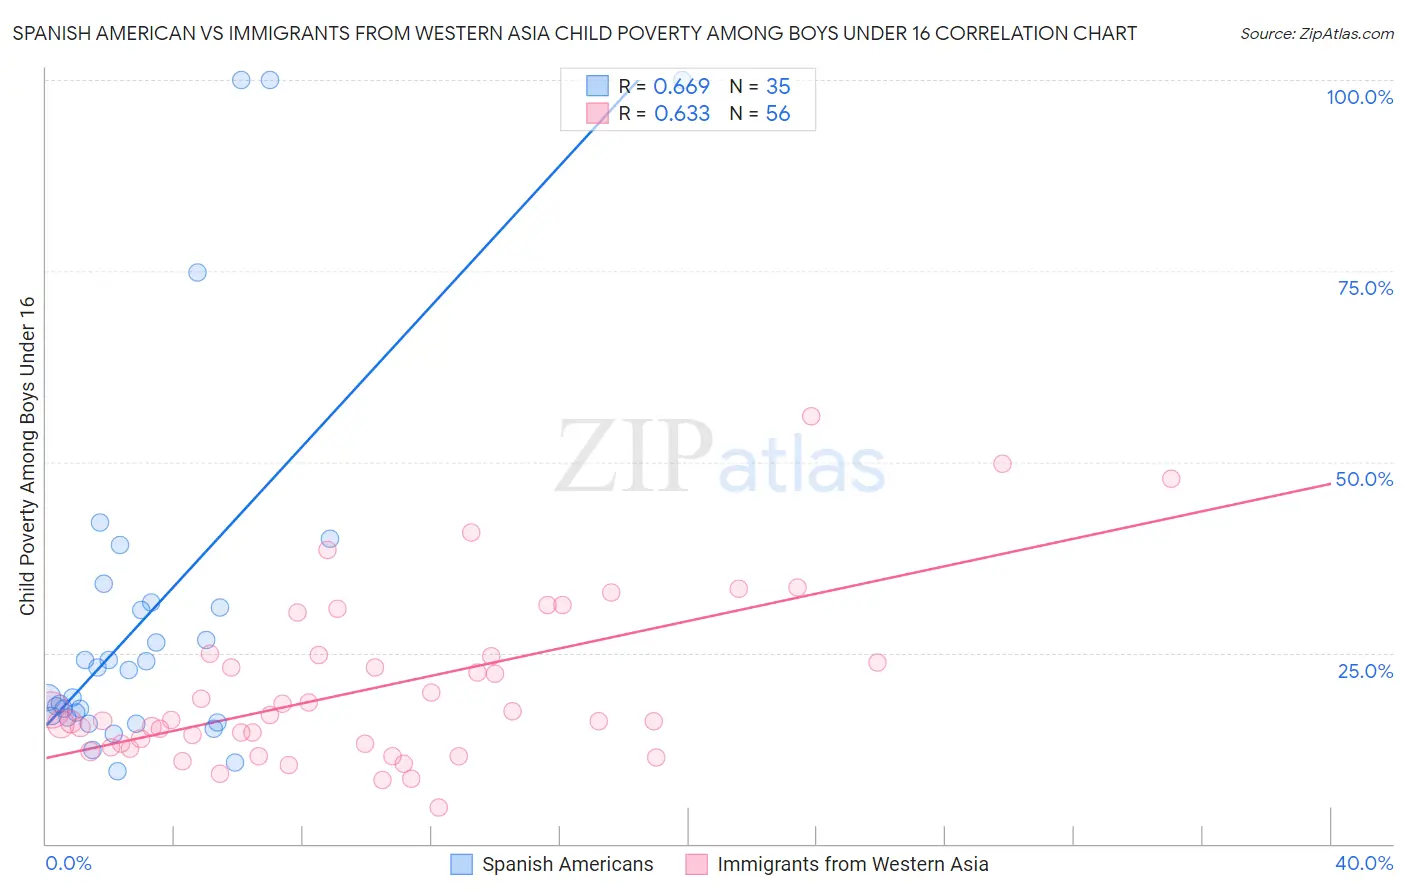 Spanish American vs Immigrants from Western Asia Child Poverty Among Boys Under 16